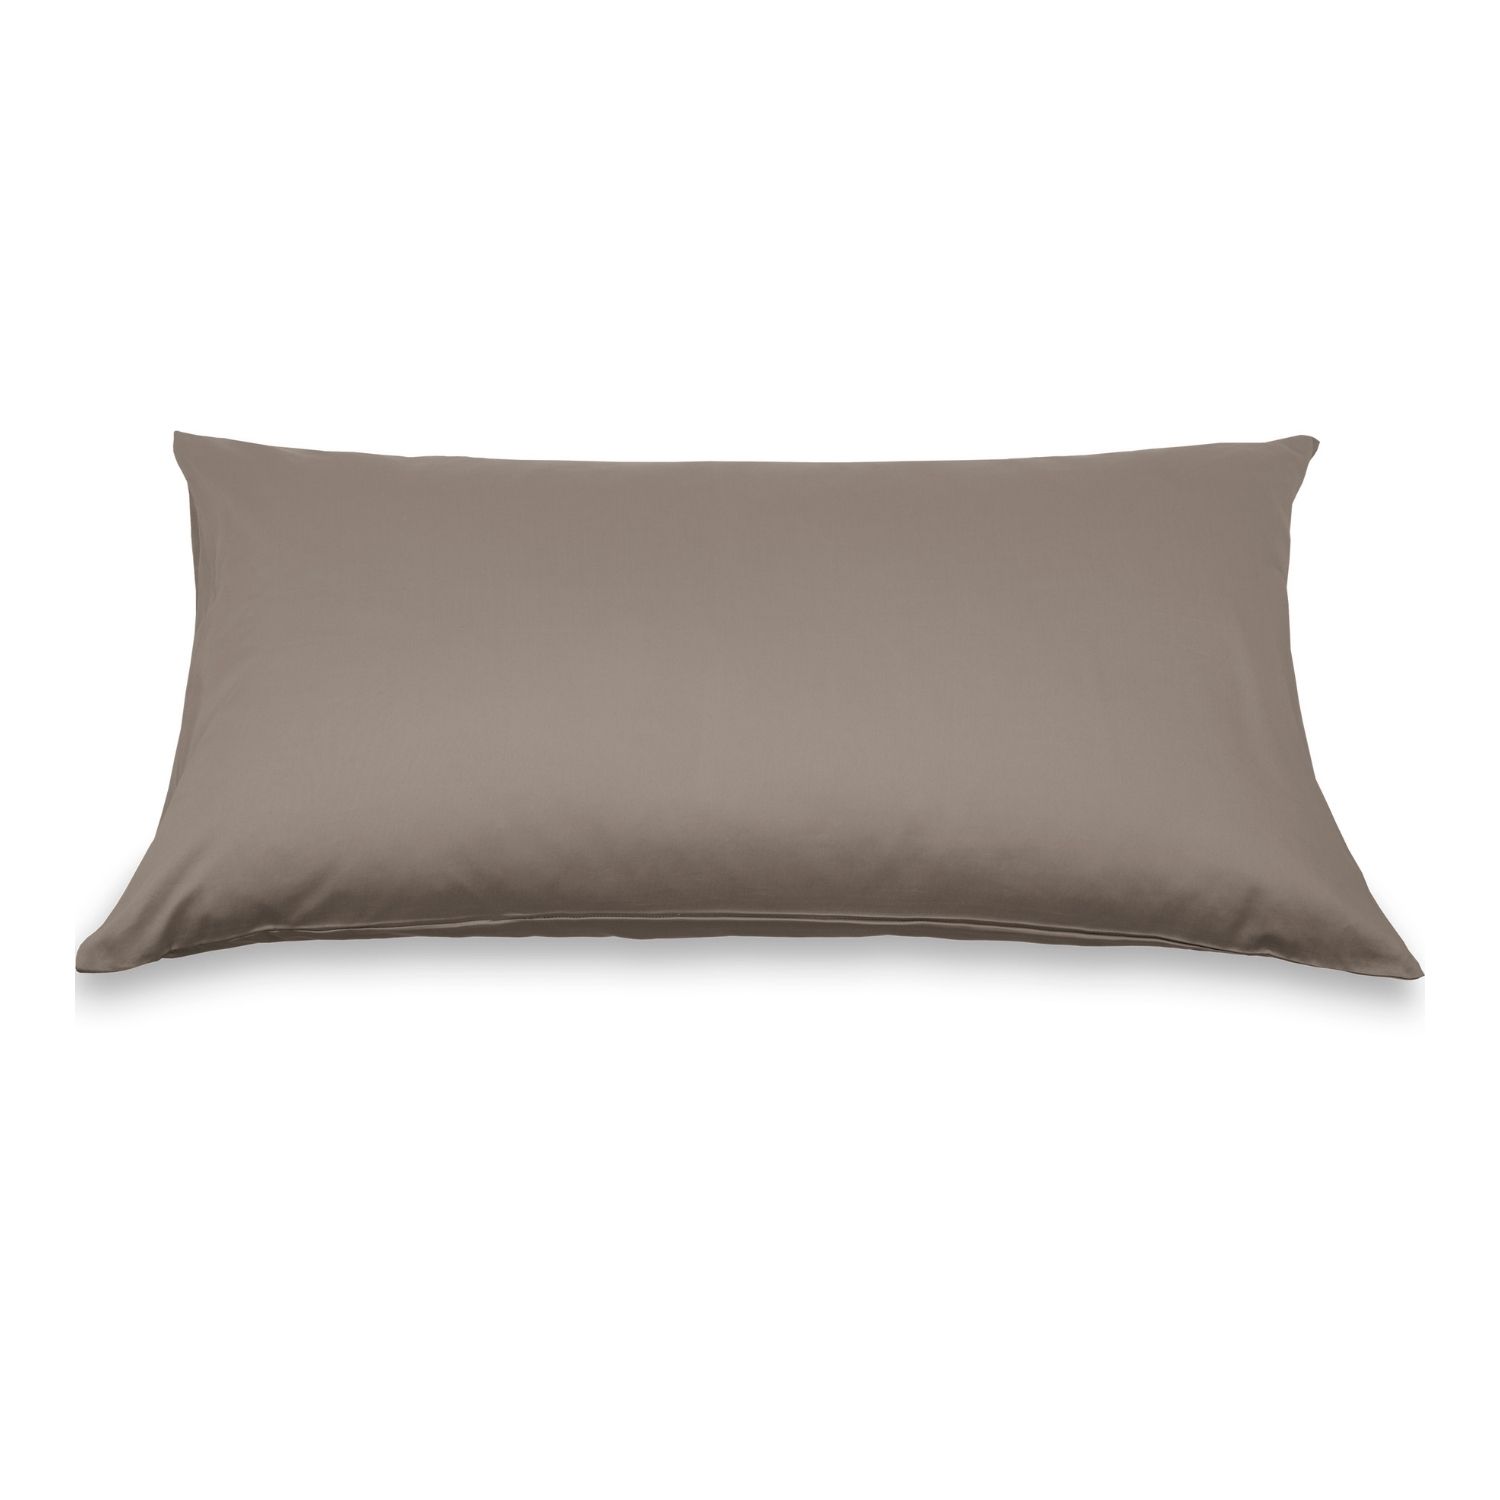 Oasi Deluxe Pillow Cover